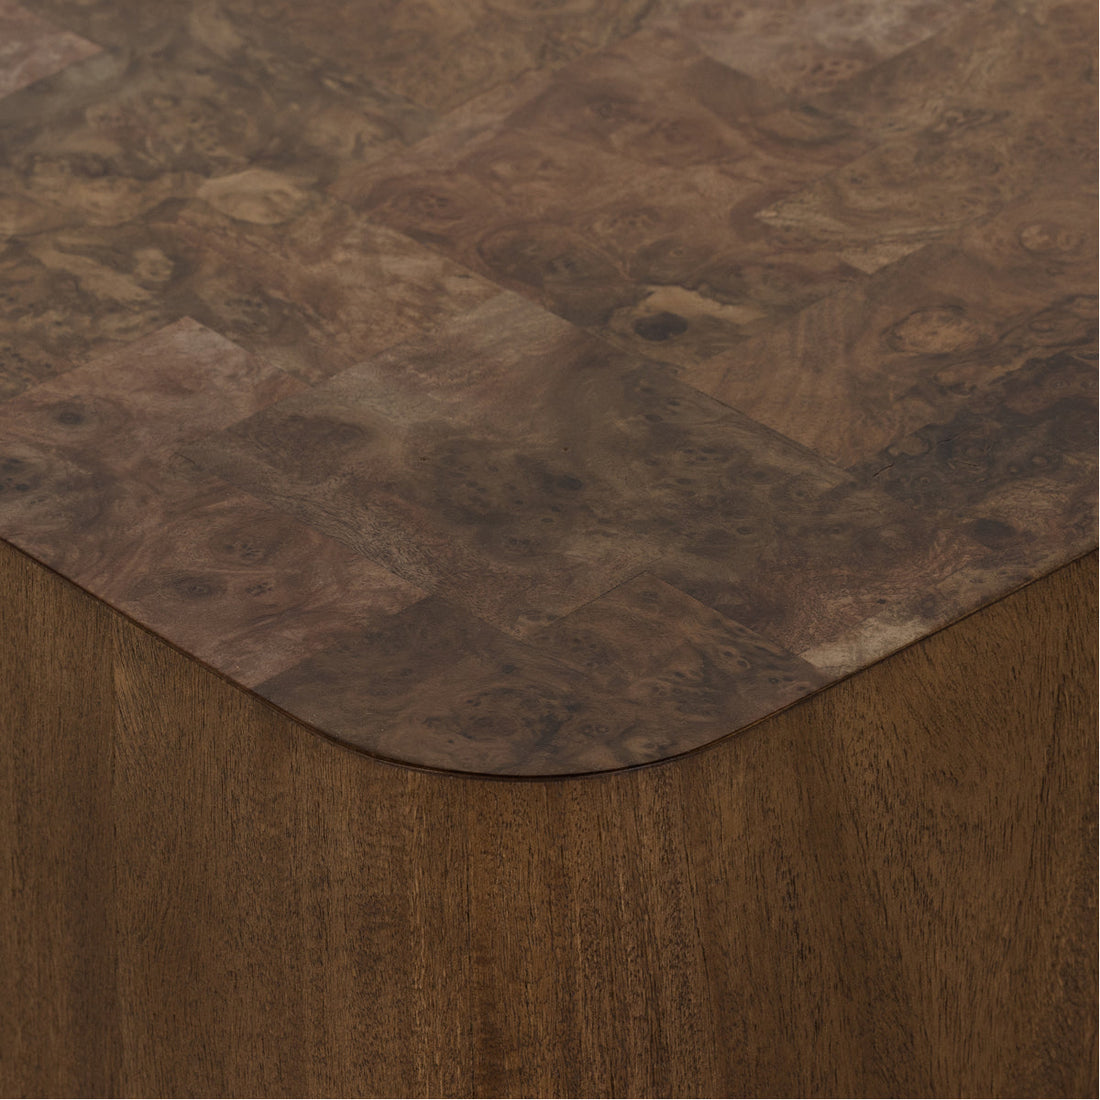 Four Hands Wesson Blanco End Table - Warm Umber Burl